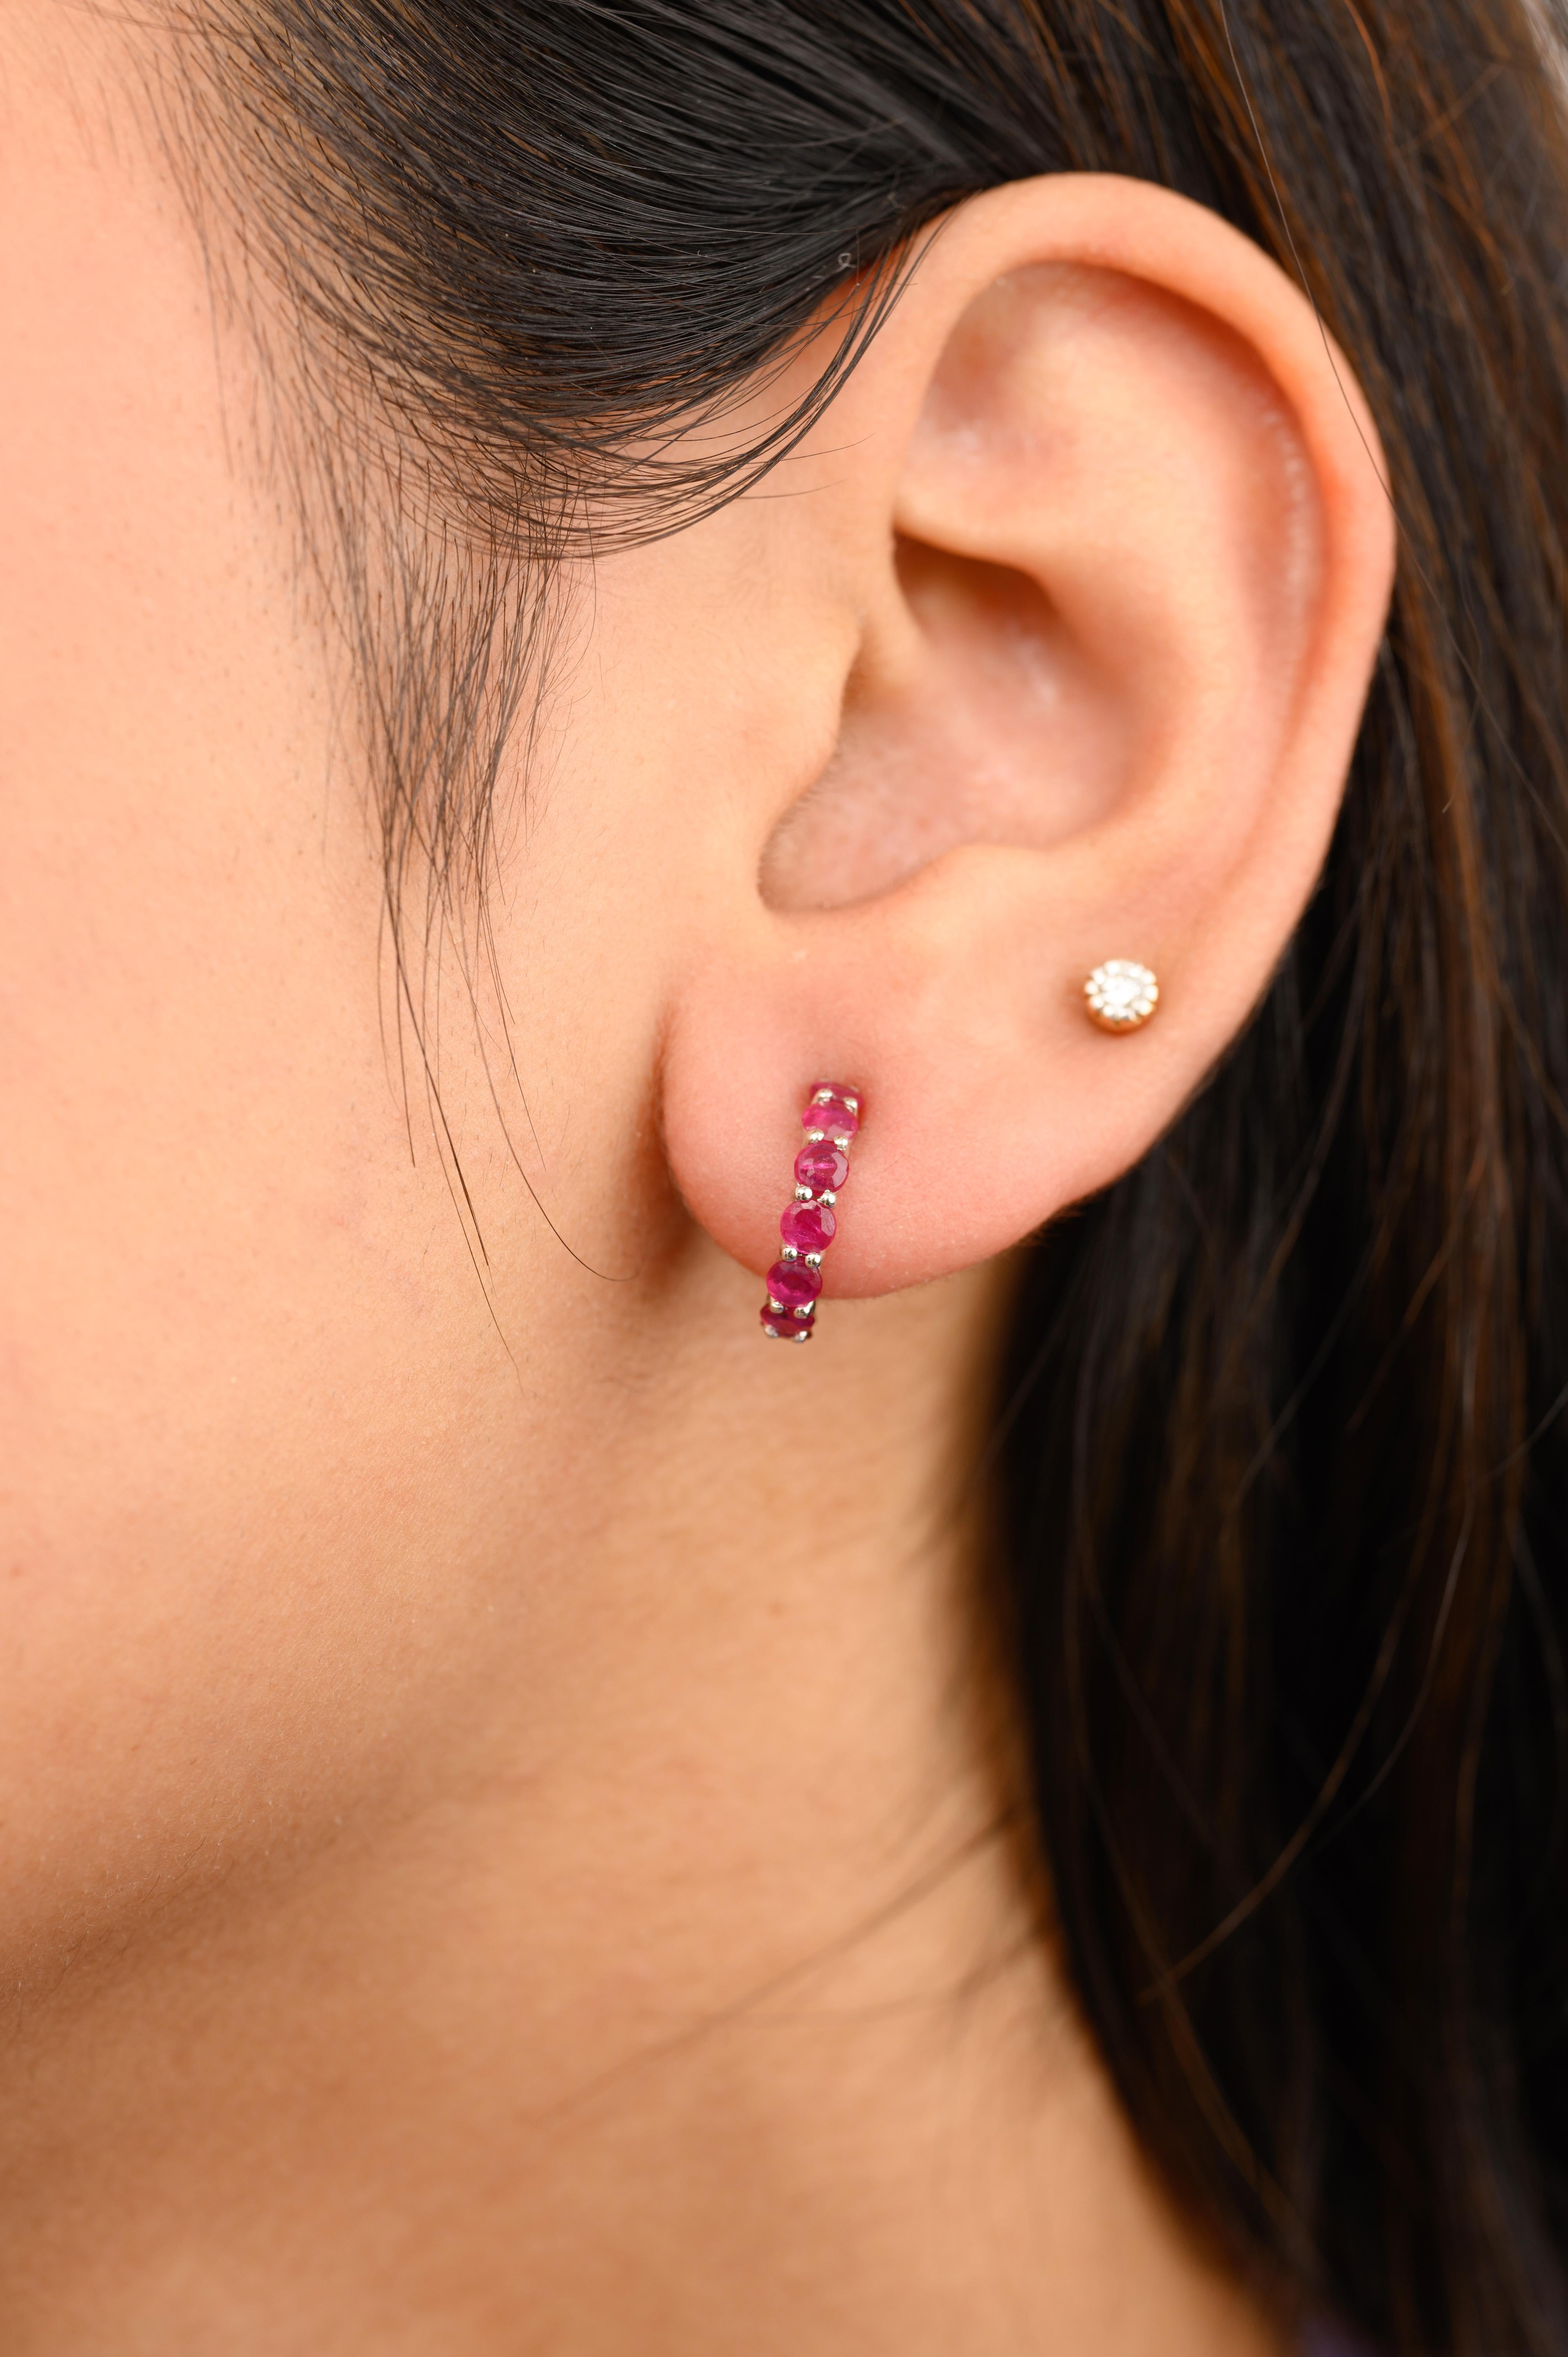 Minimalist Natural Ruby Tiny Hoop Earrings in 18K Gold to make a statement with your look. You shall need stud earrings to make a statement with your look. These earrings create a sparkling, luxurious look featuring round cut ruby.
Ruby improves